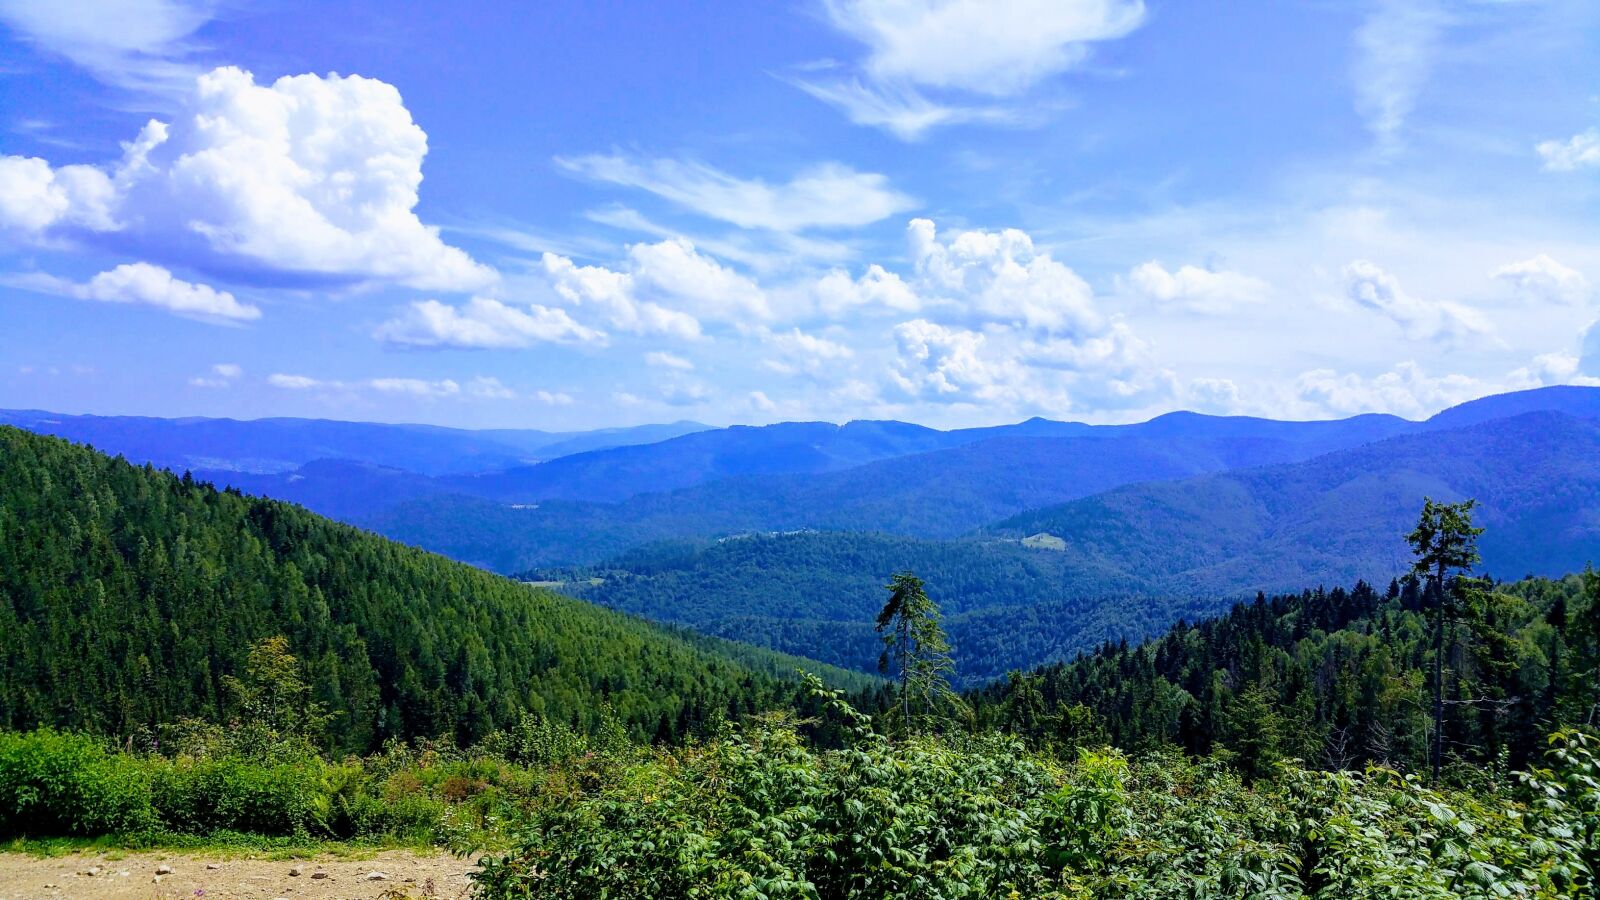 Samsung Galaxy Note Edge sample photo. Mountains, the carpathians, nature photography